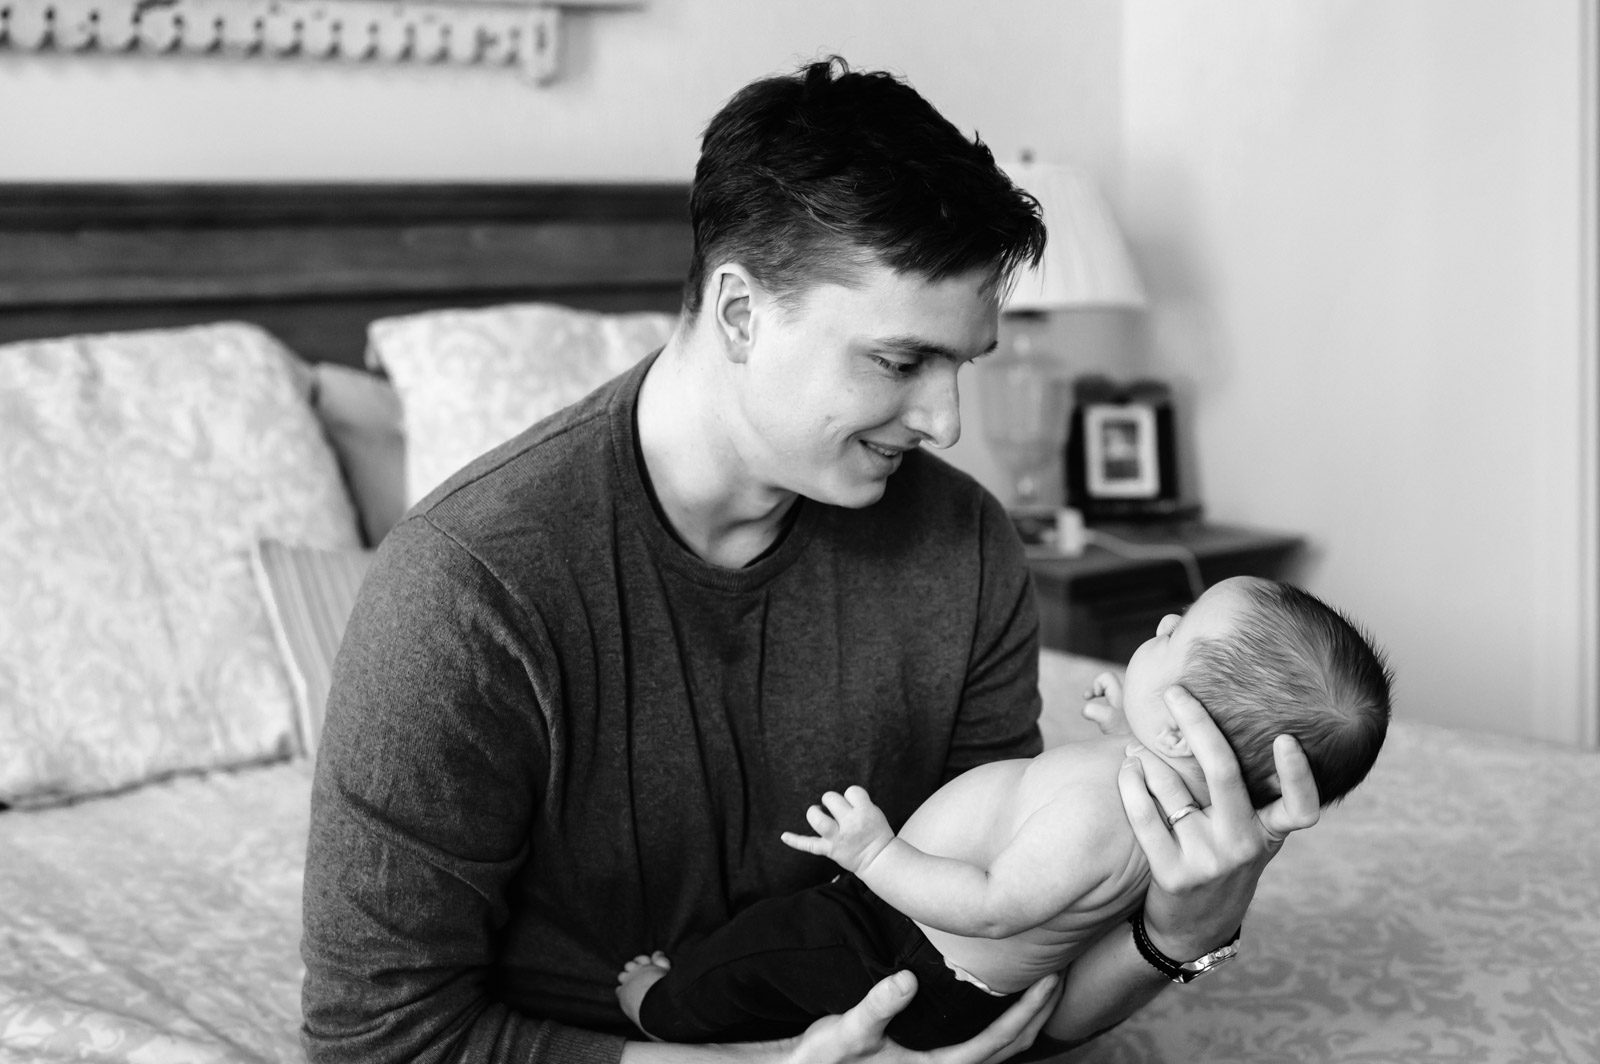 A black and white image of a new father sitting on his bed and smiling down at his newborn son in his arms during a home newborn photo session